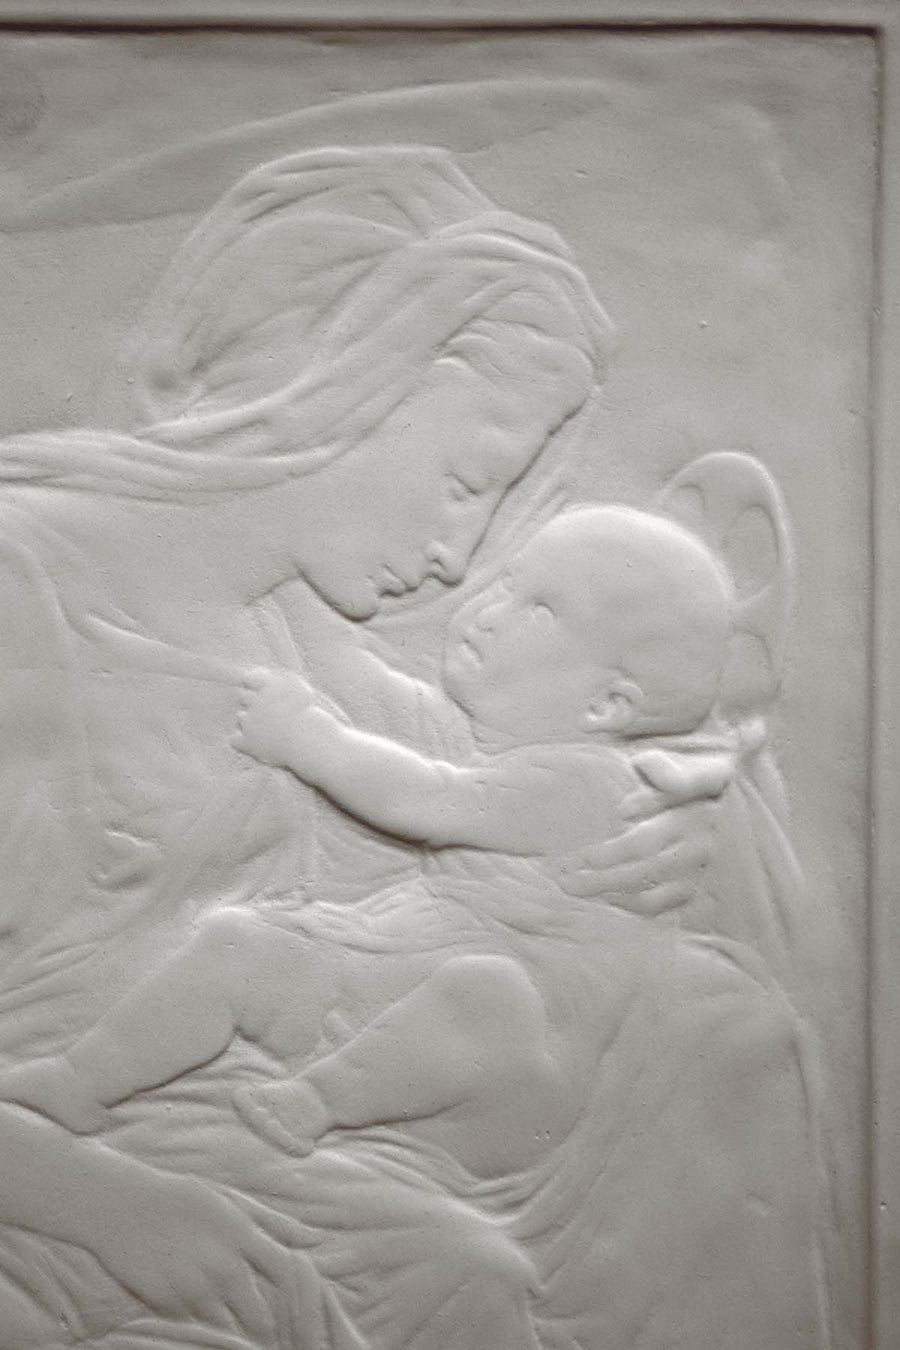 photo detail of plaster cast sculpture relief of the Madonna holding baby Jesus on her lap on black background